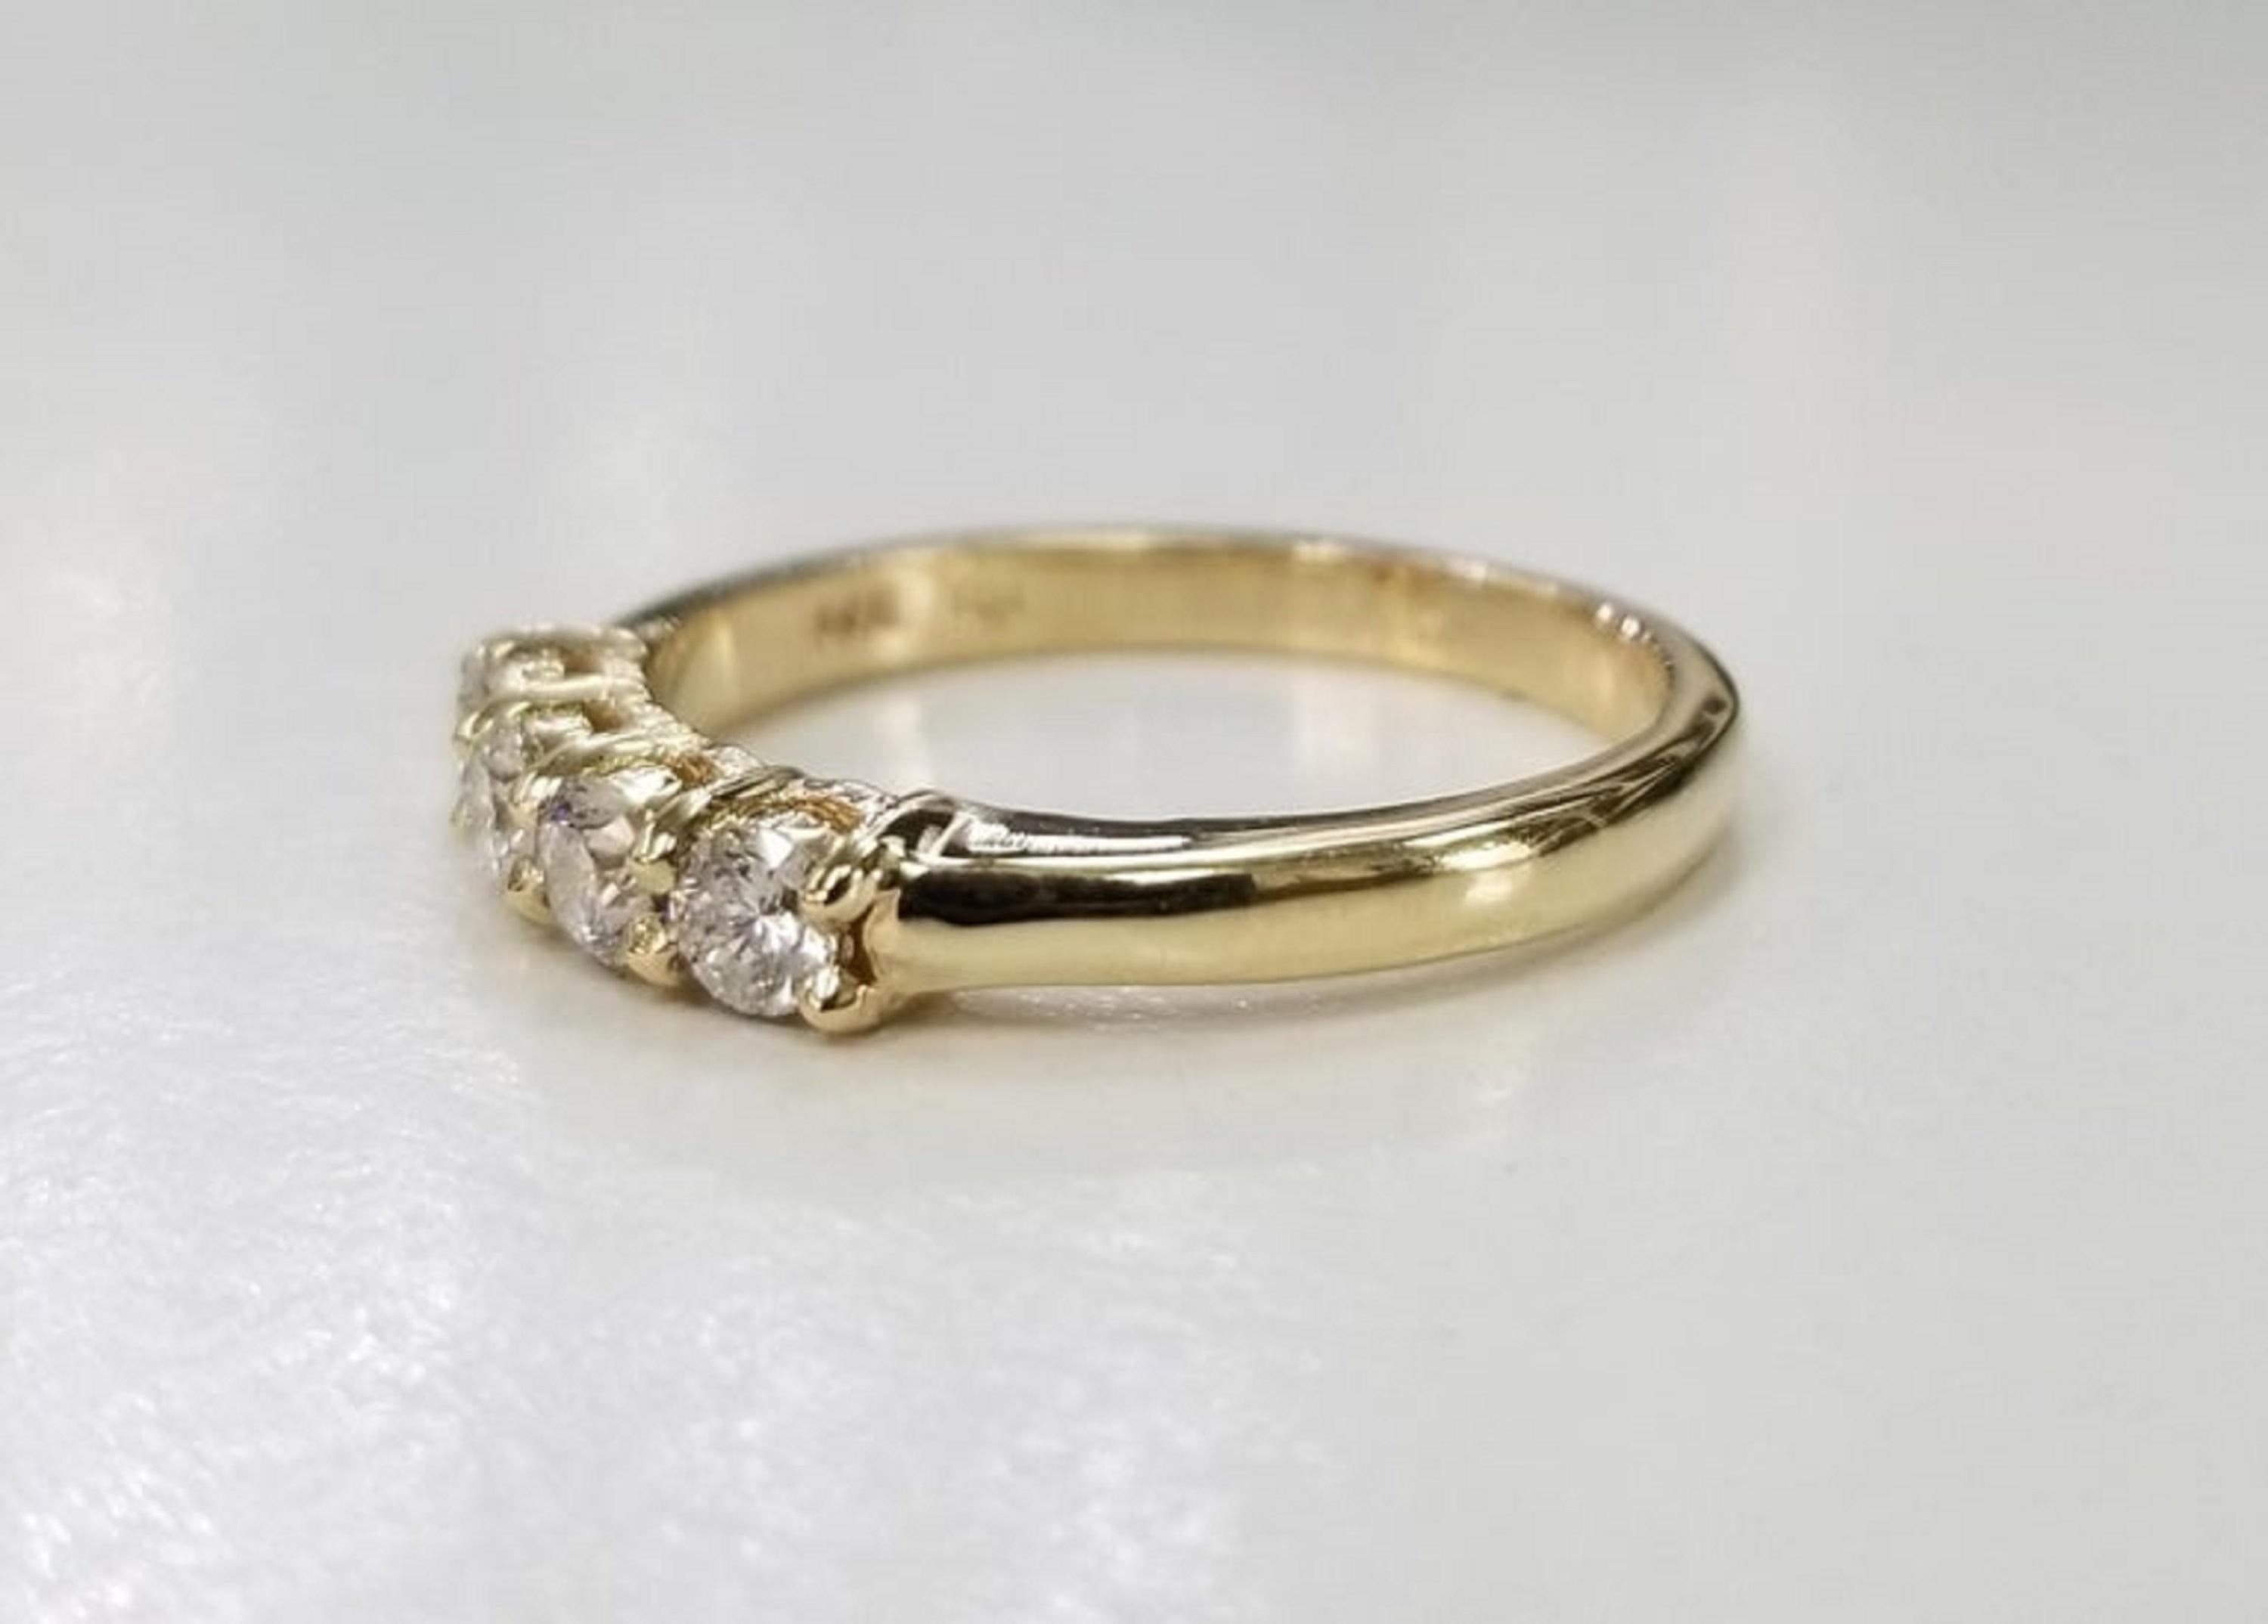 14k yellow gold 4 diamond ring wedding anniversary ring .44pts., containing 4 round full cut diamonds of very nice quality weighing .44pts.  ring size is 7 and can be sized to fir for free.